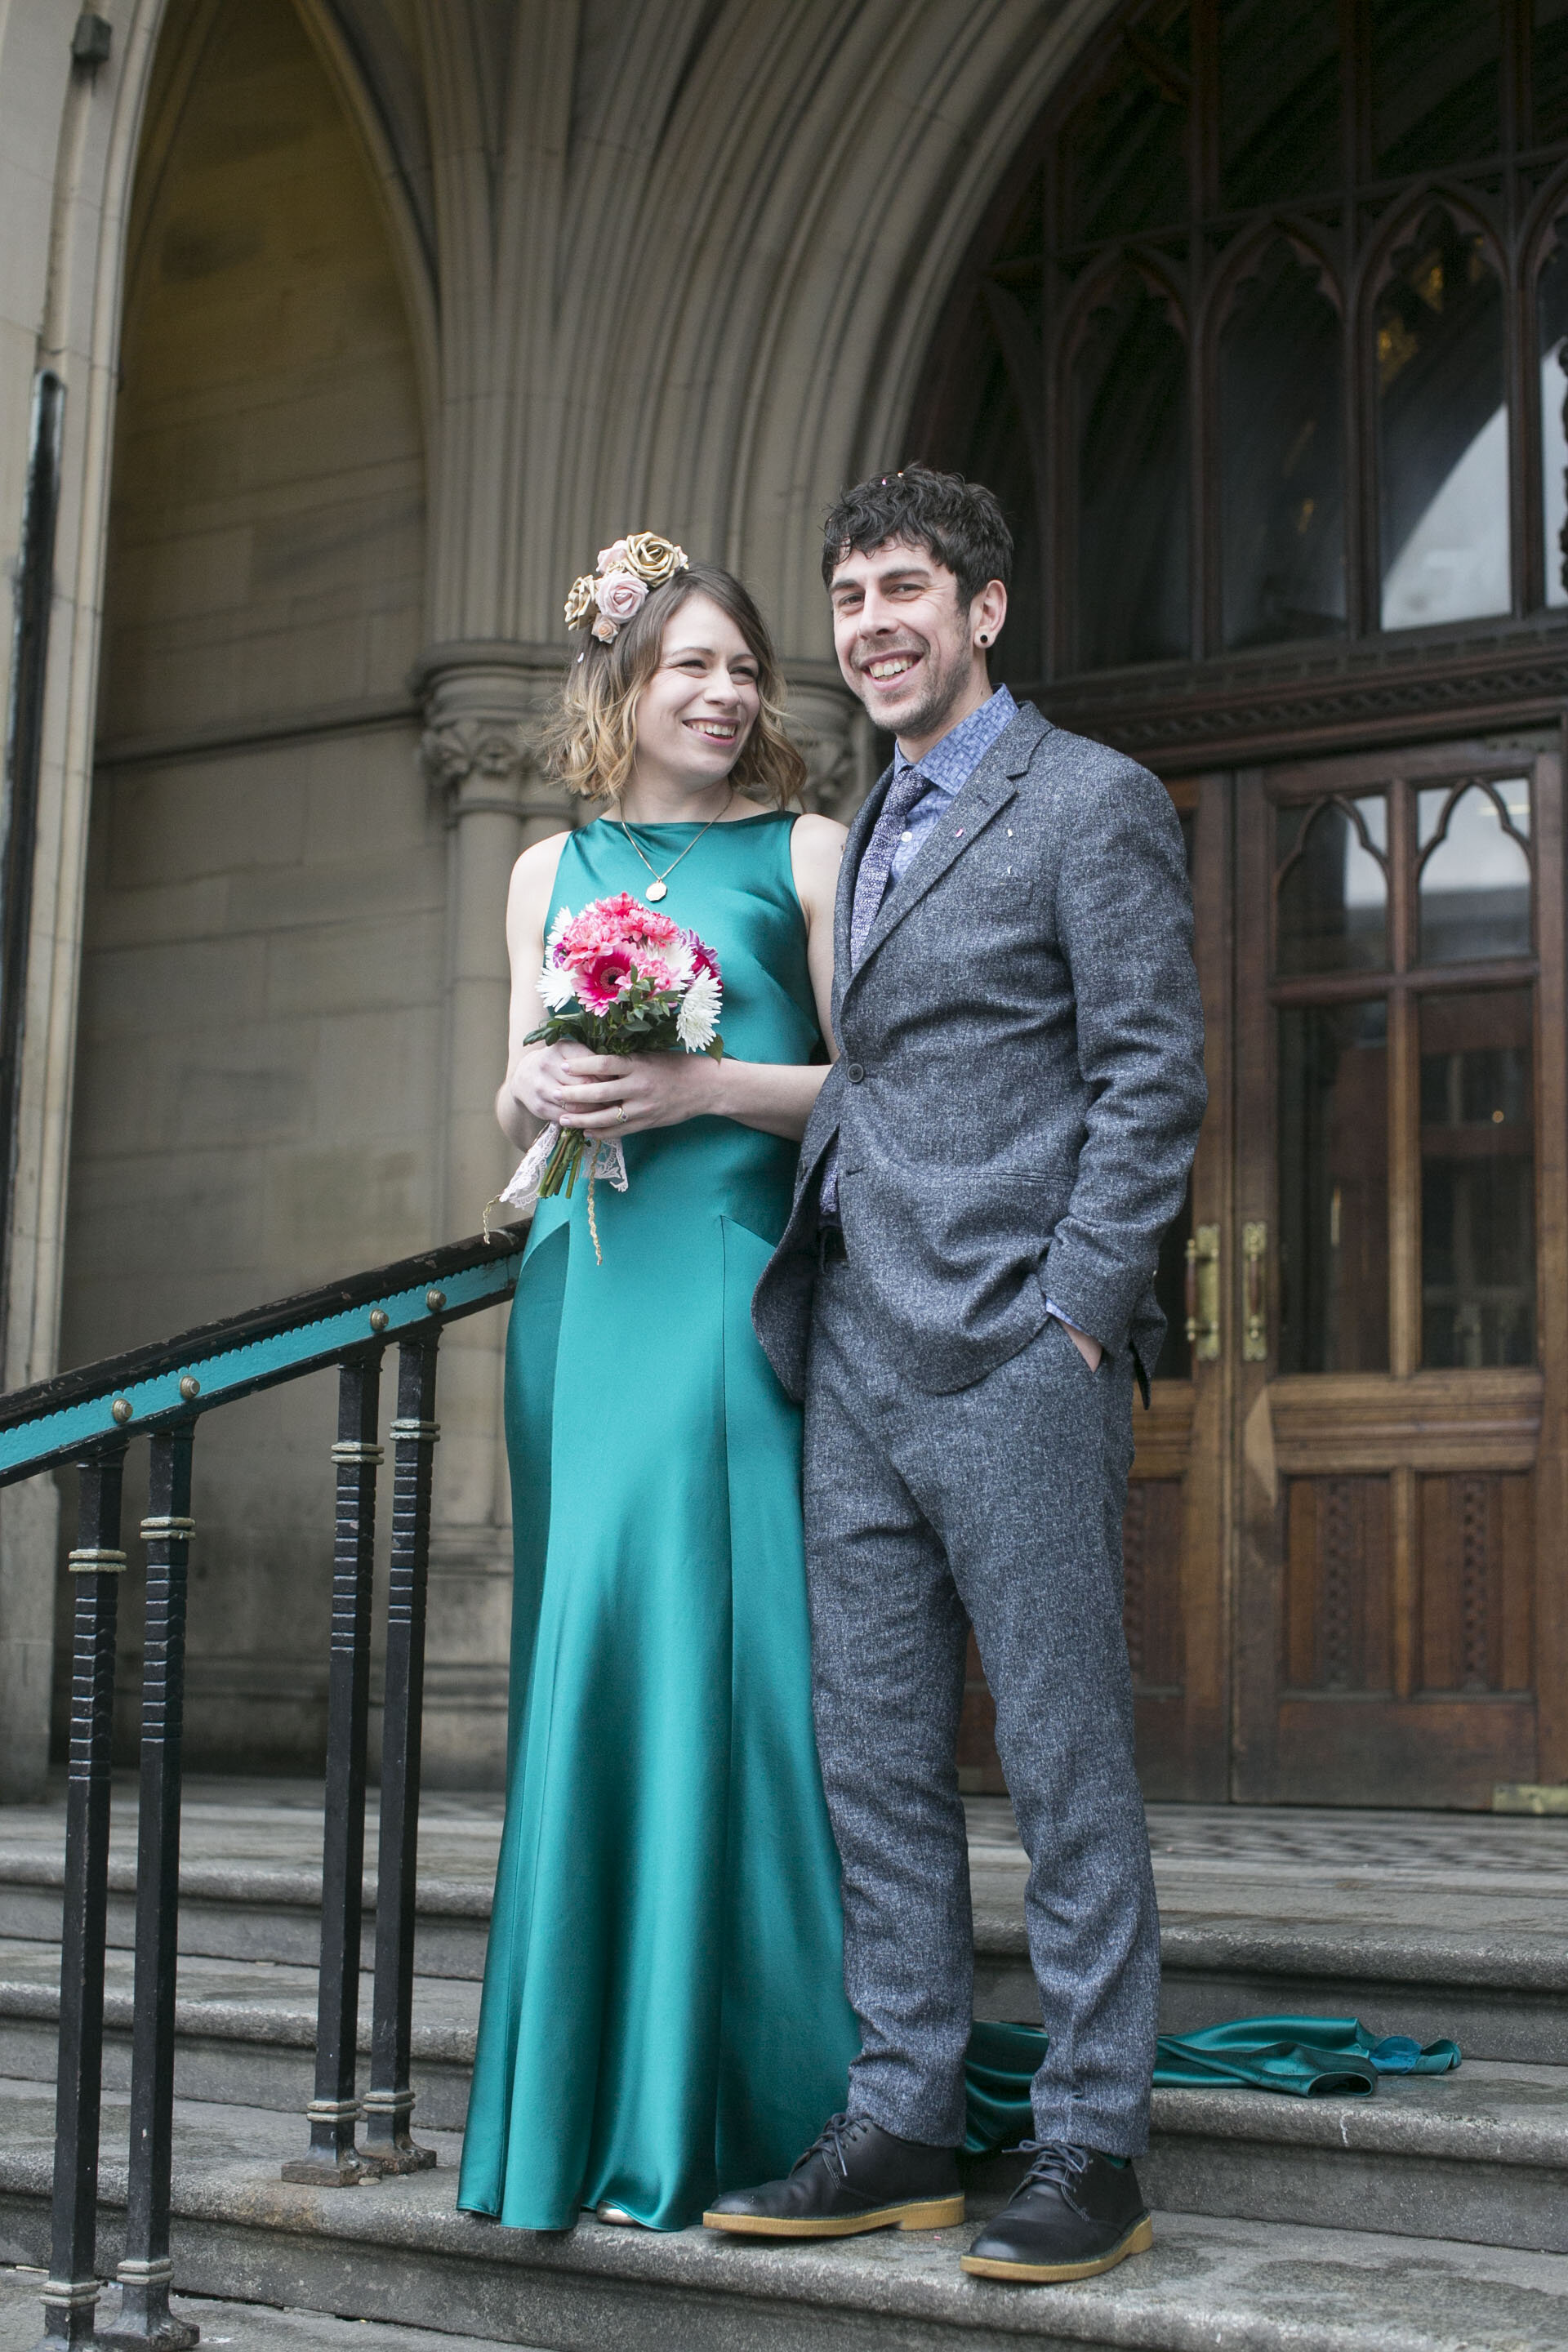 Katie opted for a  Teal shade for her May Dress